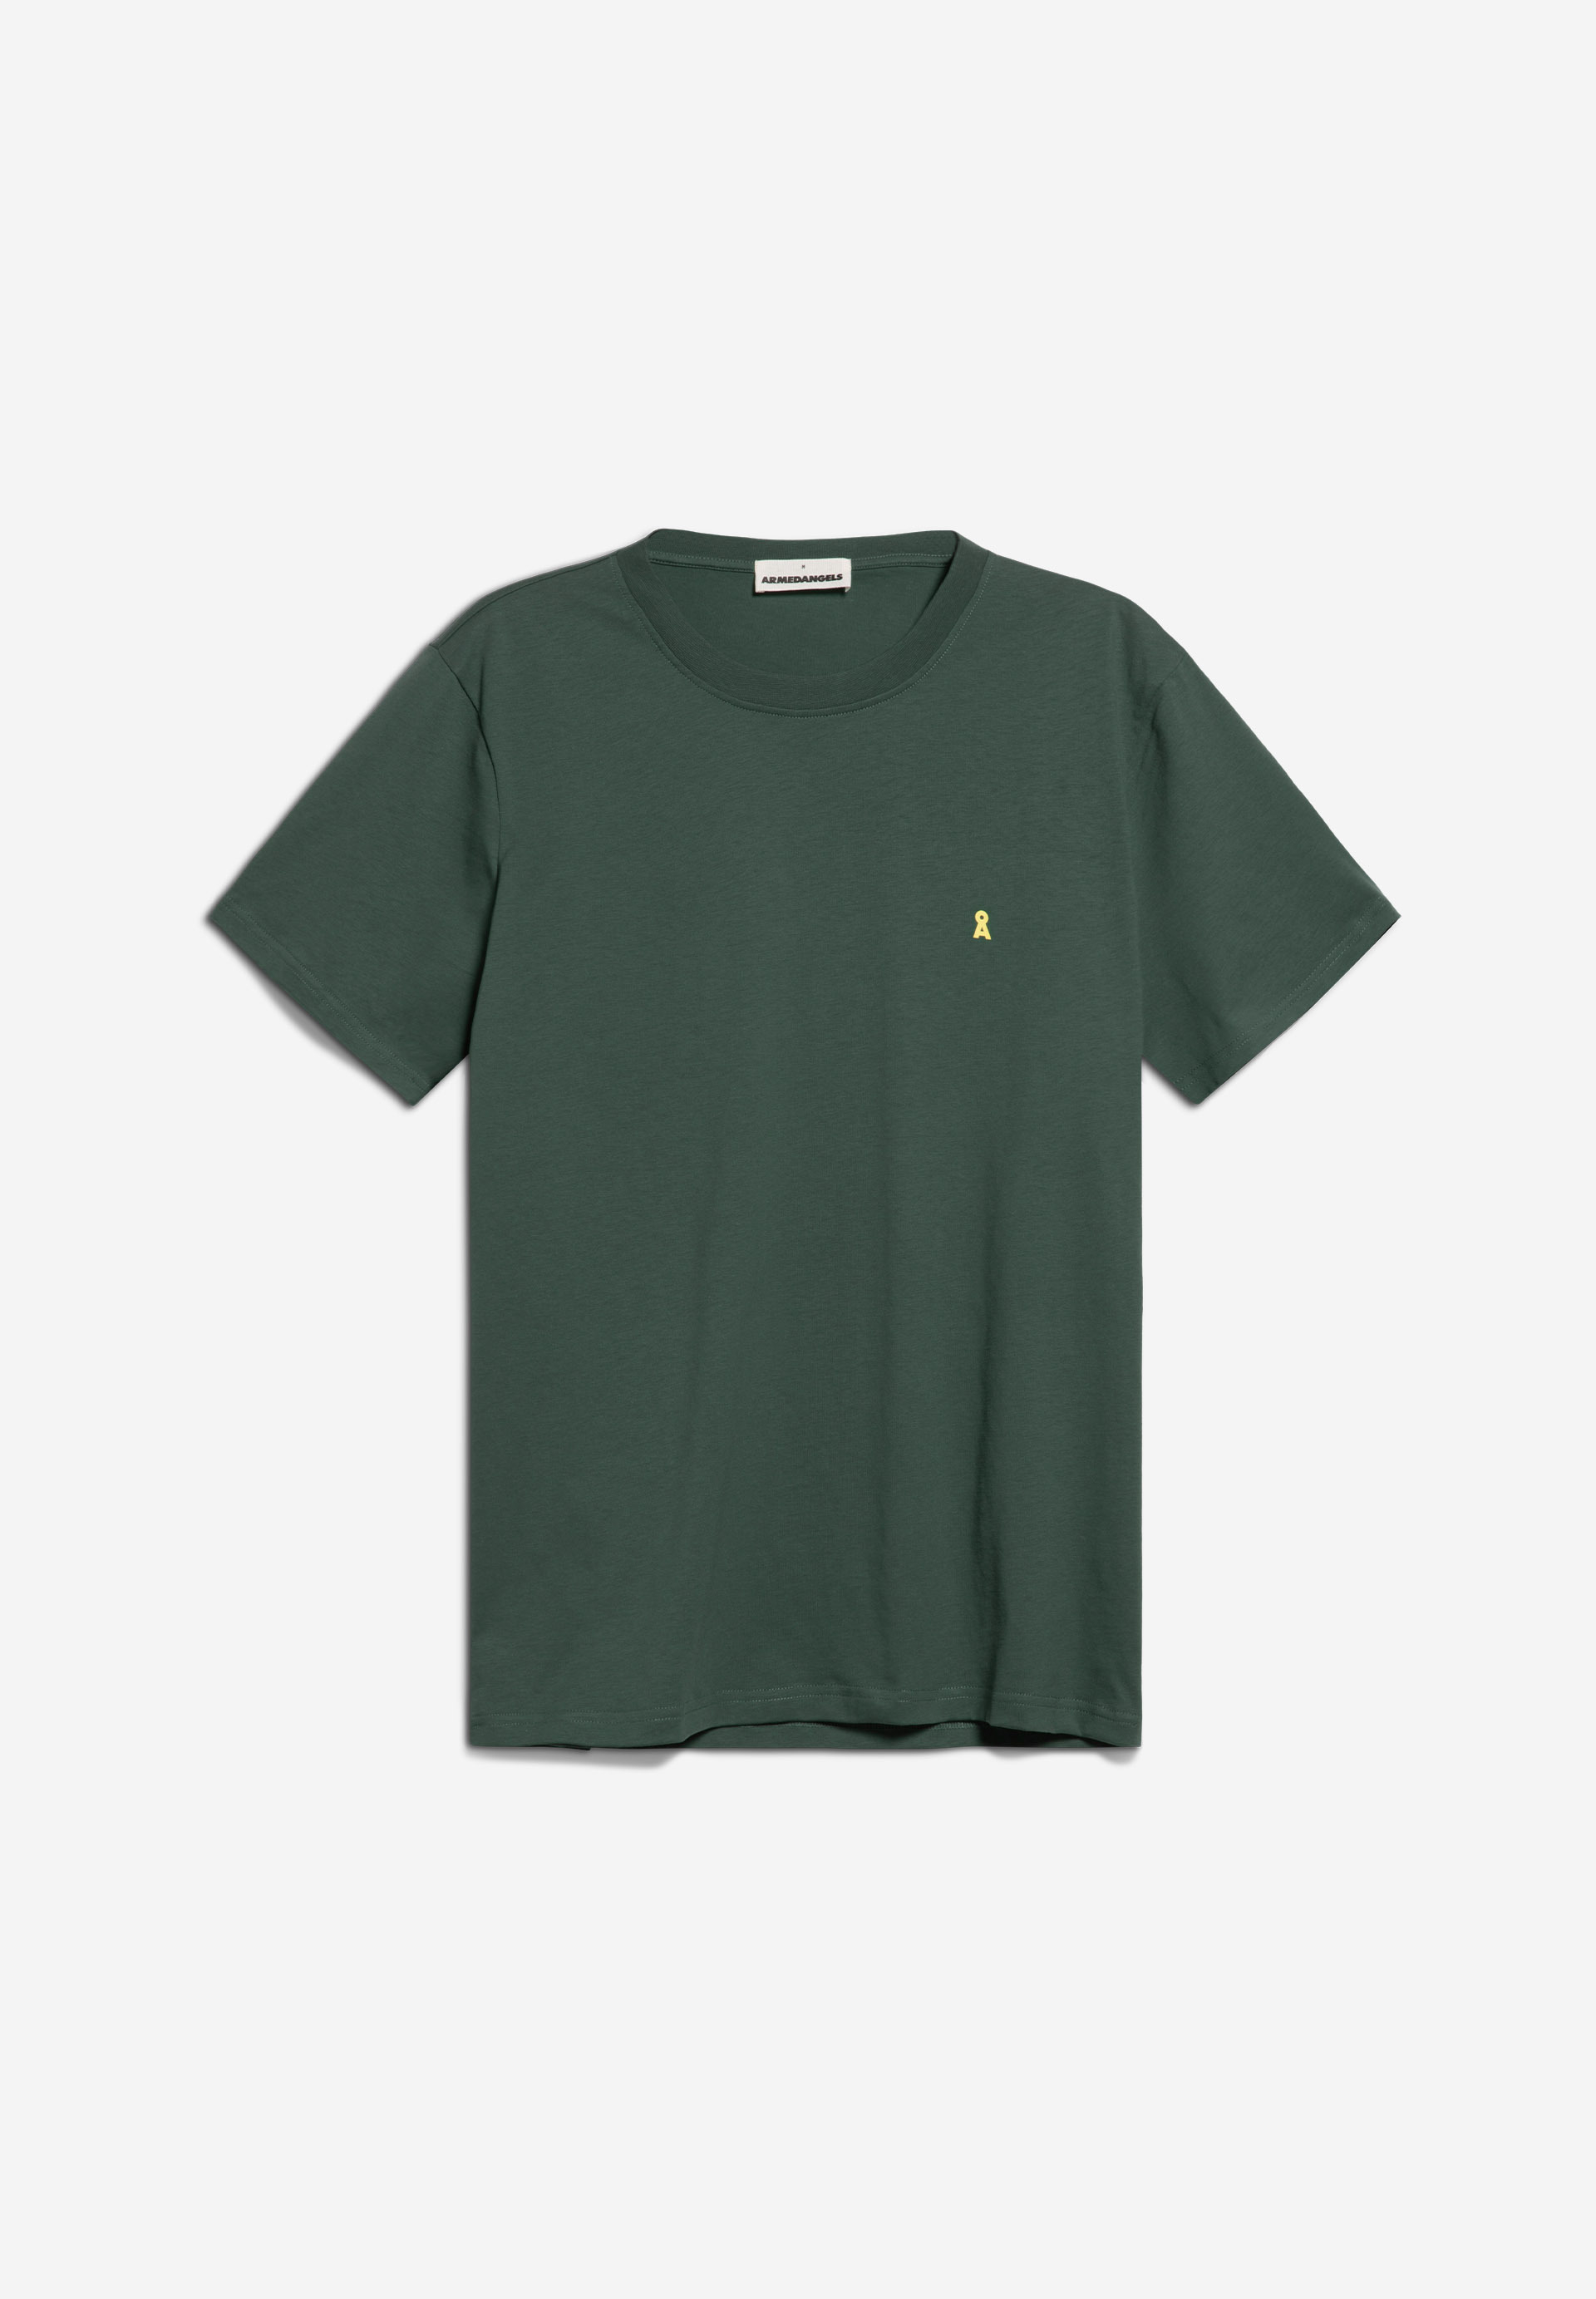 LAARON Heavyweight T-Shirt Relaxed Fit made of Organic Cotton